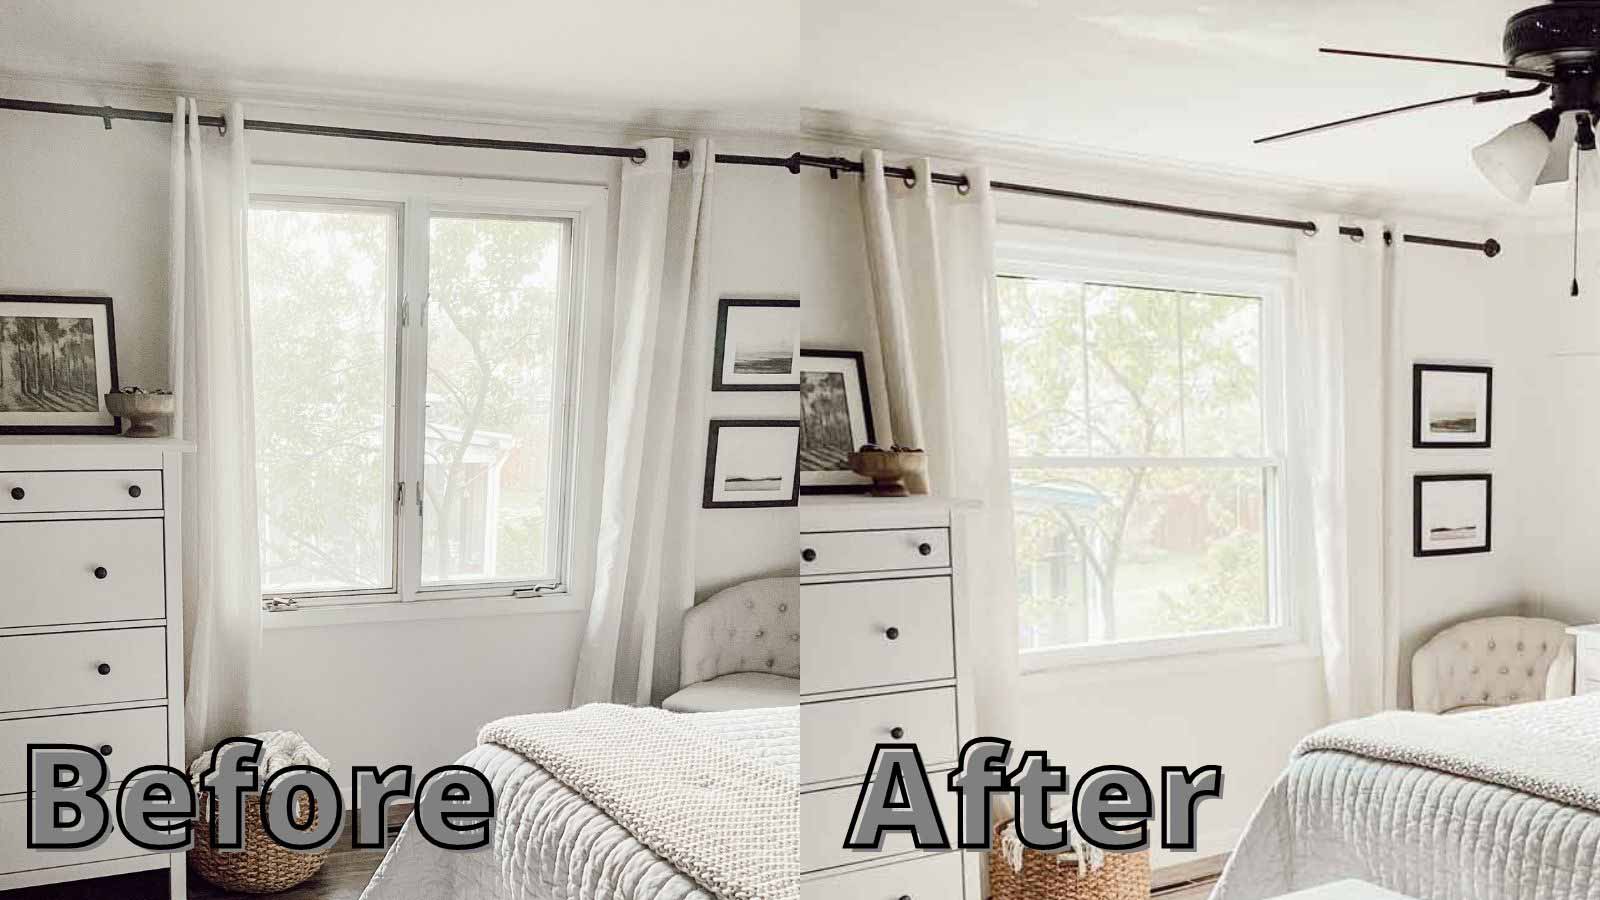 Before and after of a replaced window